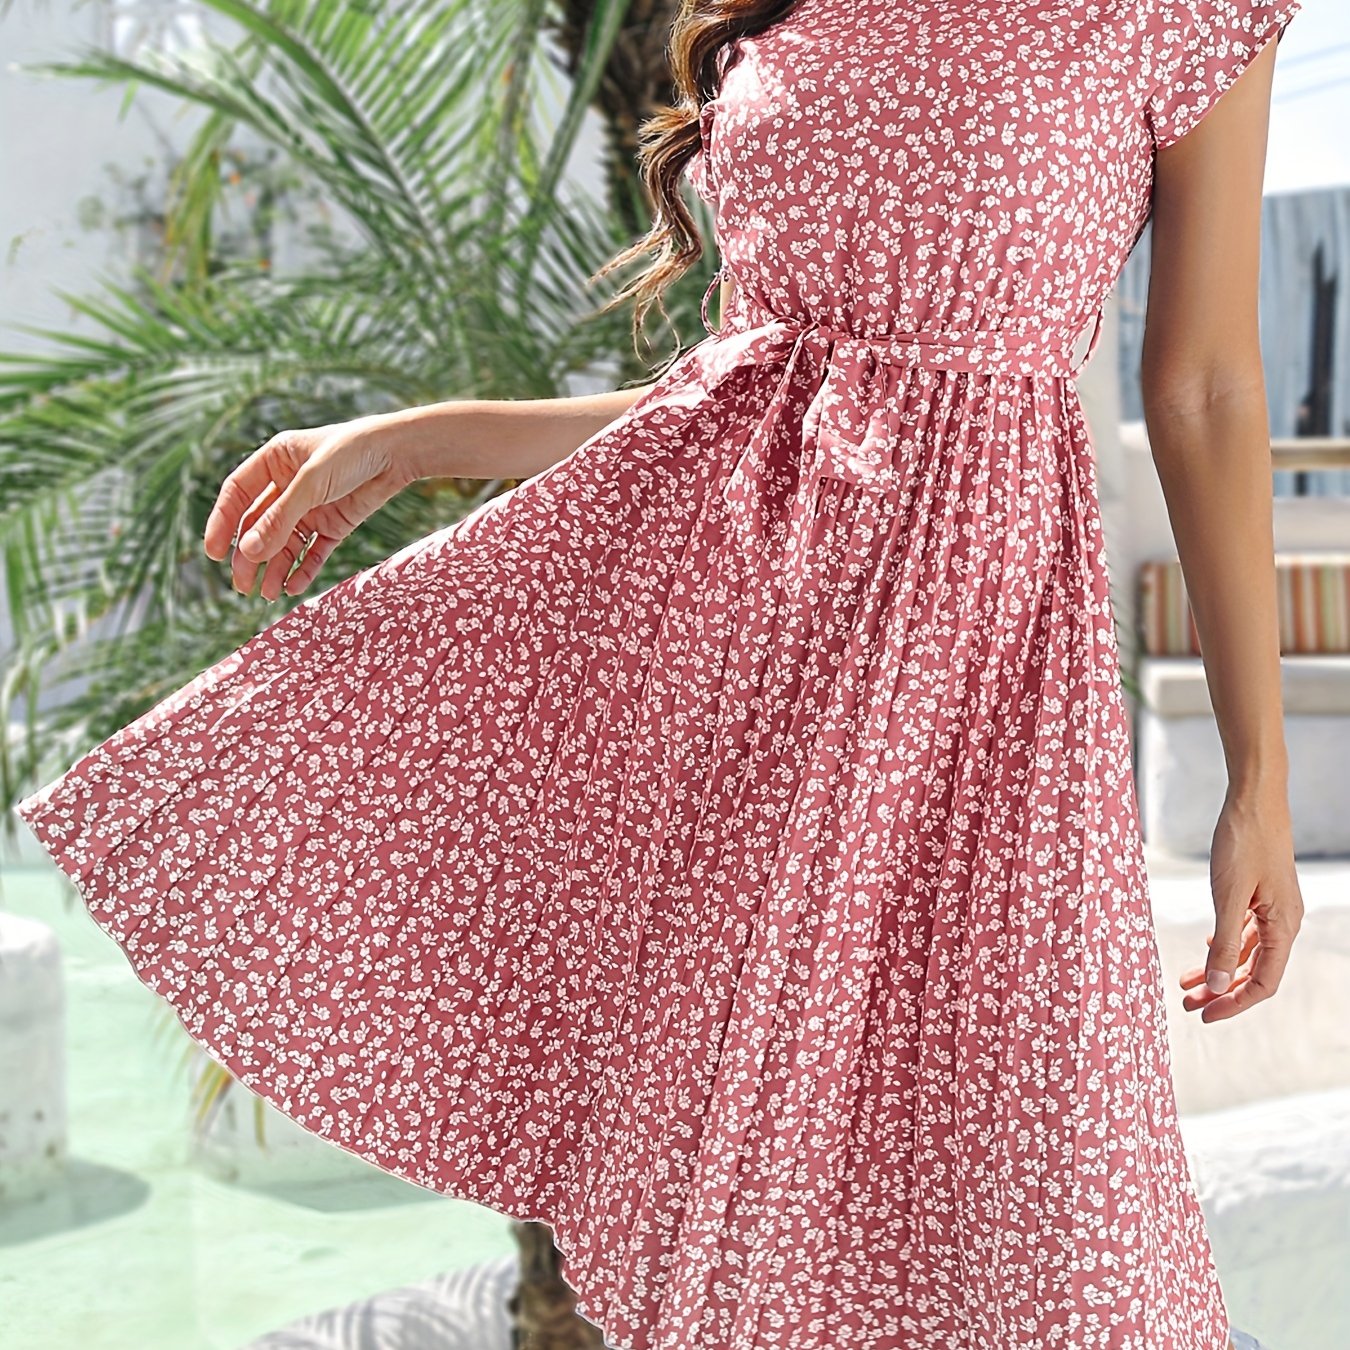 「lovevop」Ditsy Floral Print Belted Dress, Short Sleeve Casual Every Day Vacation Dress For Spring & Summer, Women's Clothing